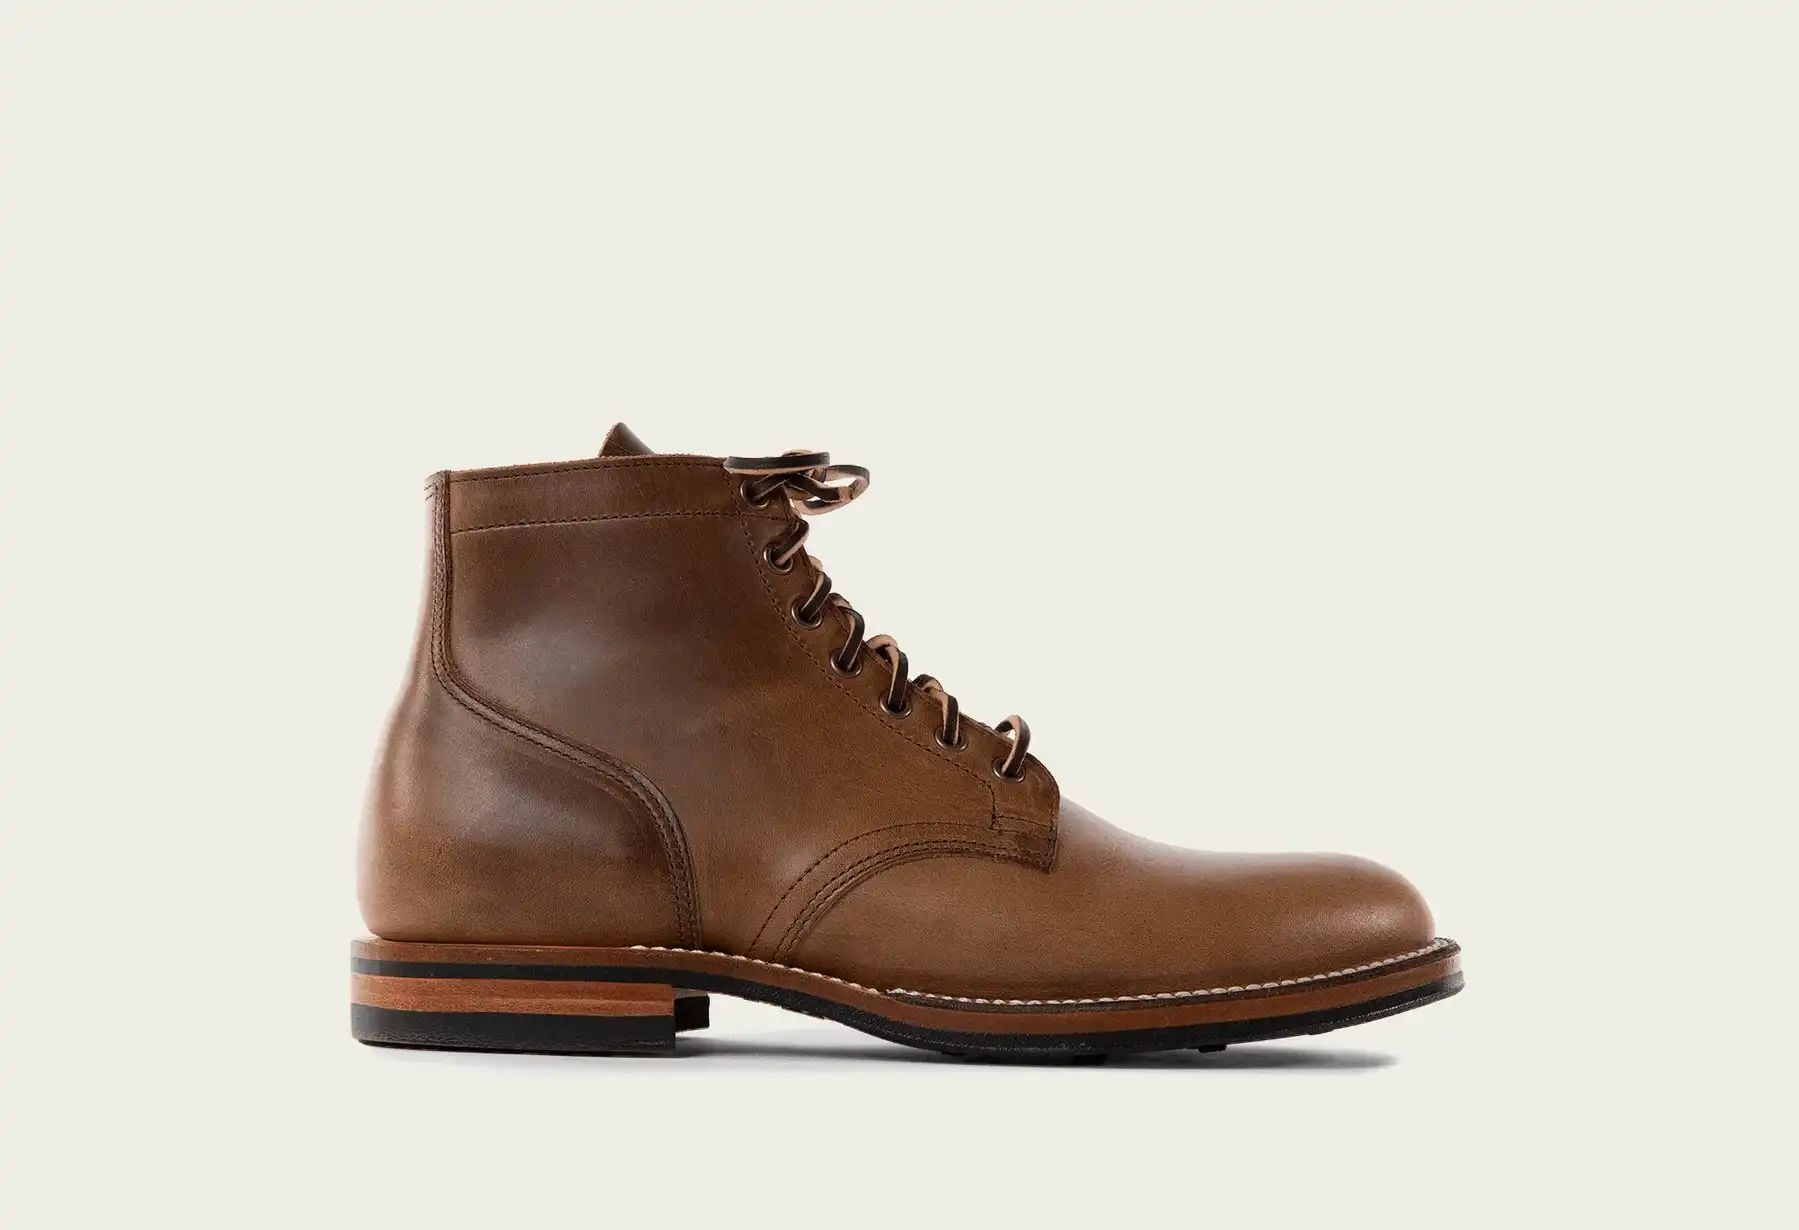 Viberg Service Boots in Natural Chromexcel